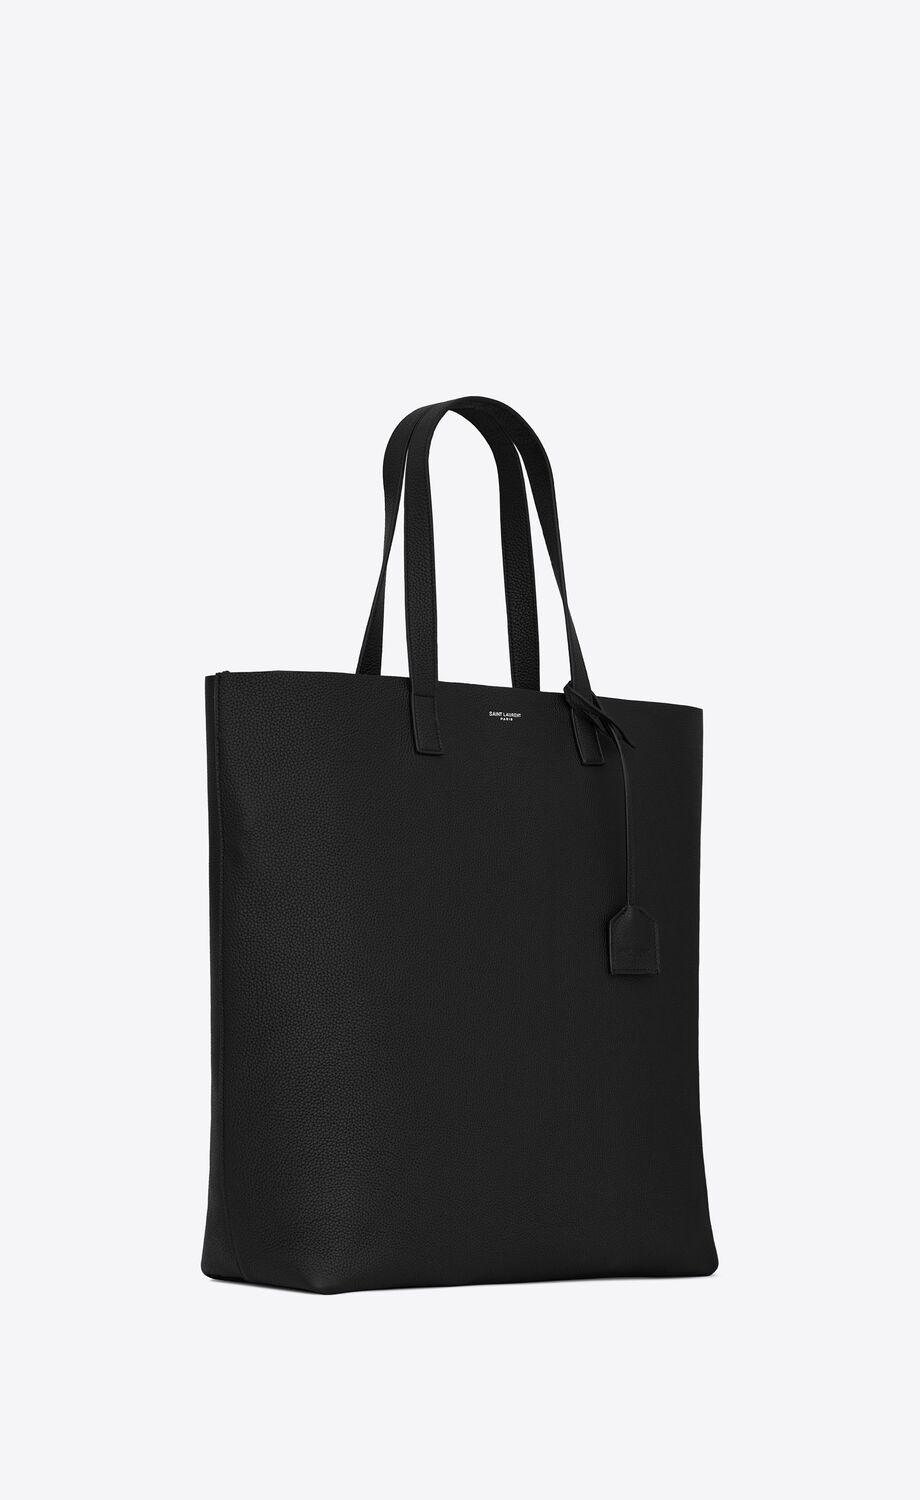 BOLD shopping bag in grained leather | Saint Laurent | YSL.com